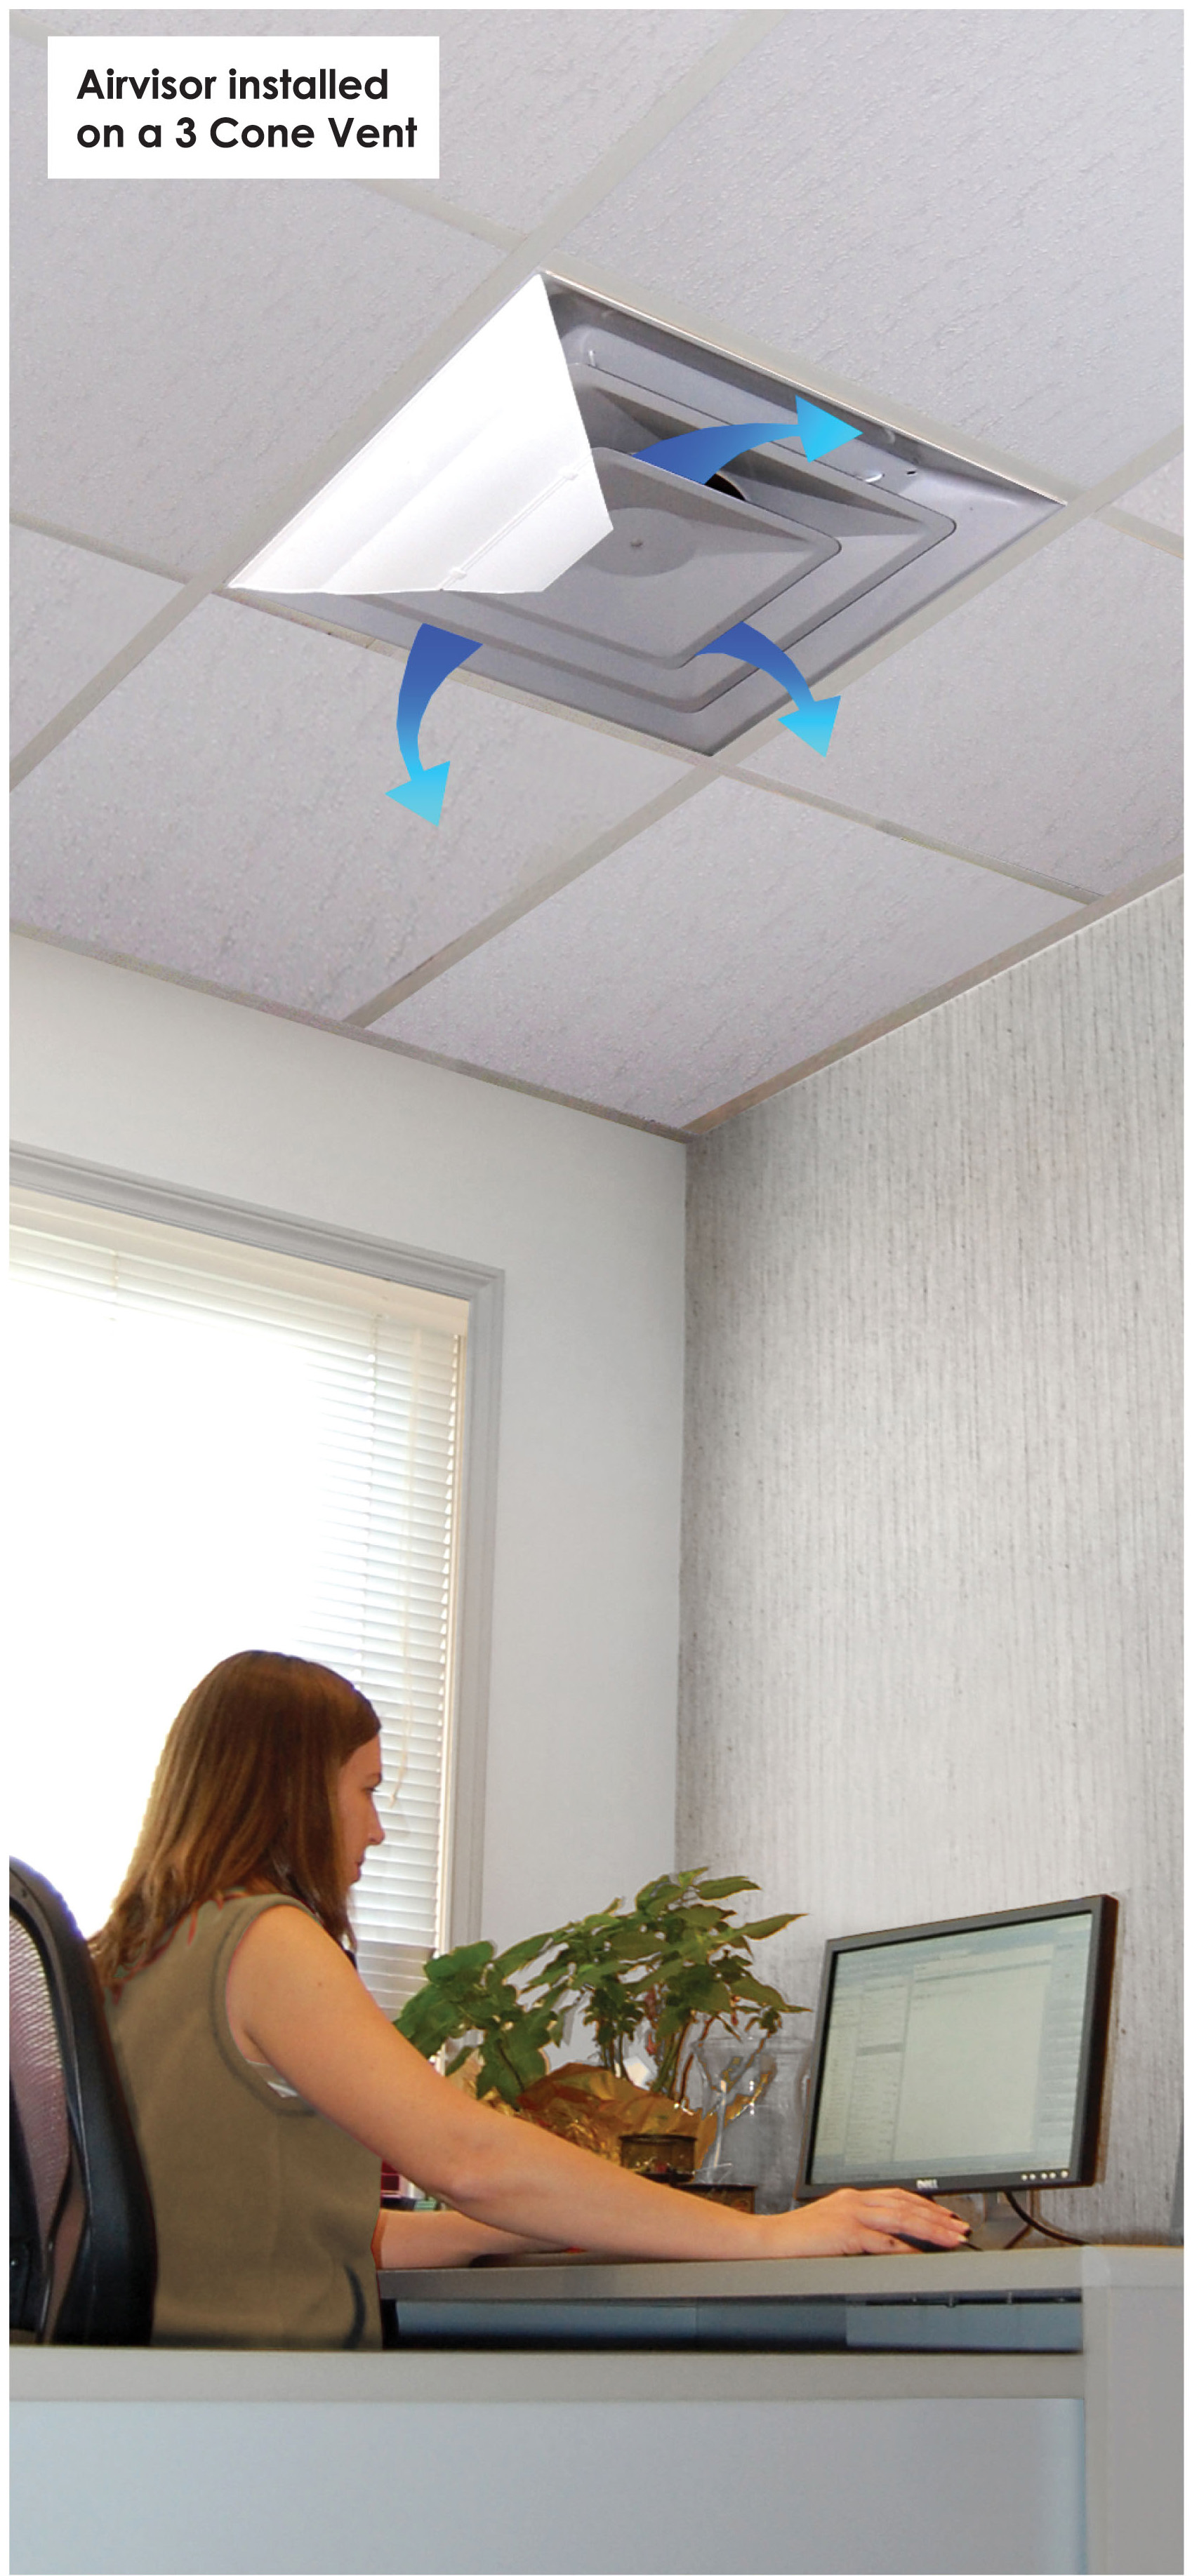 Airvisor air deflector installed to 3 cone ceiling vent in workplace office